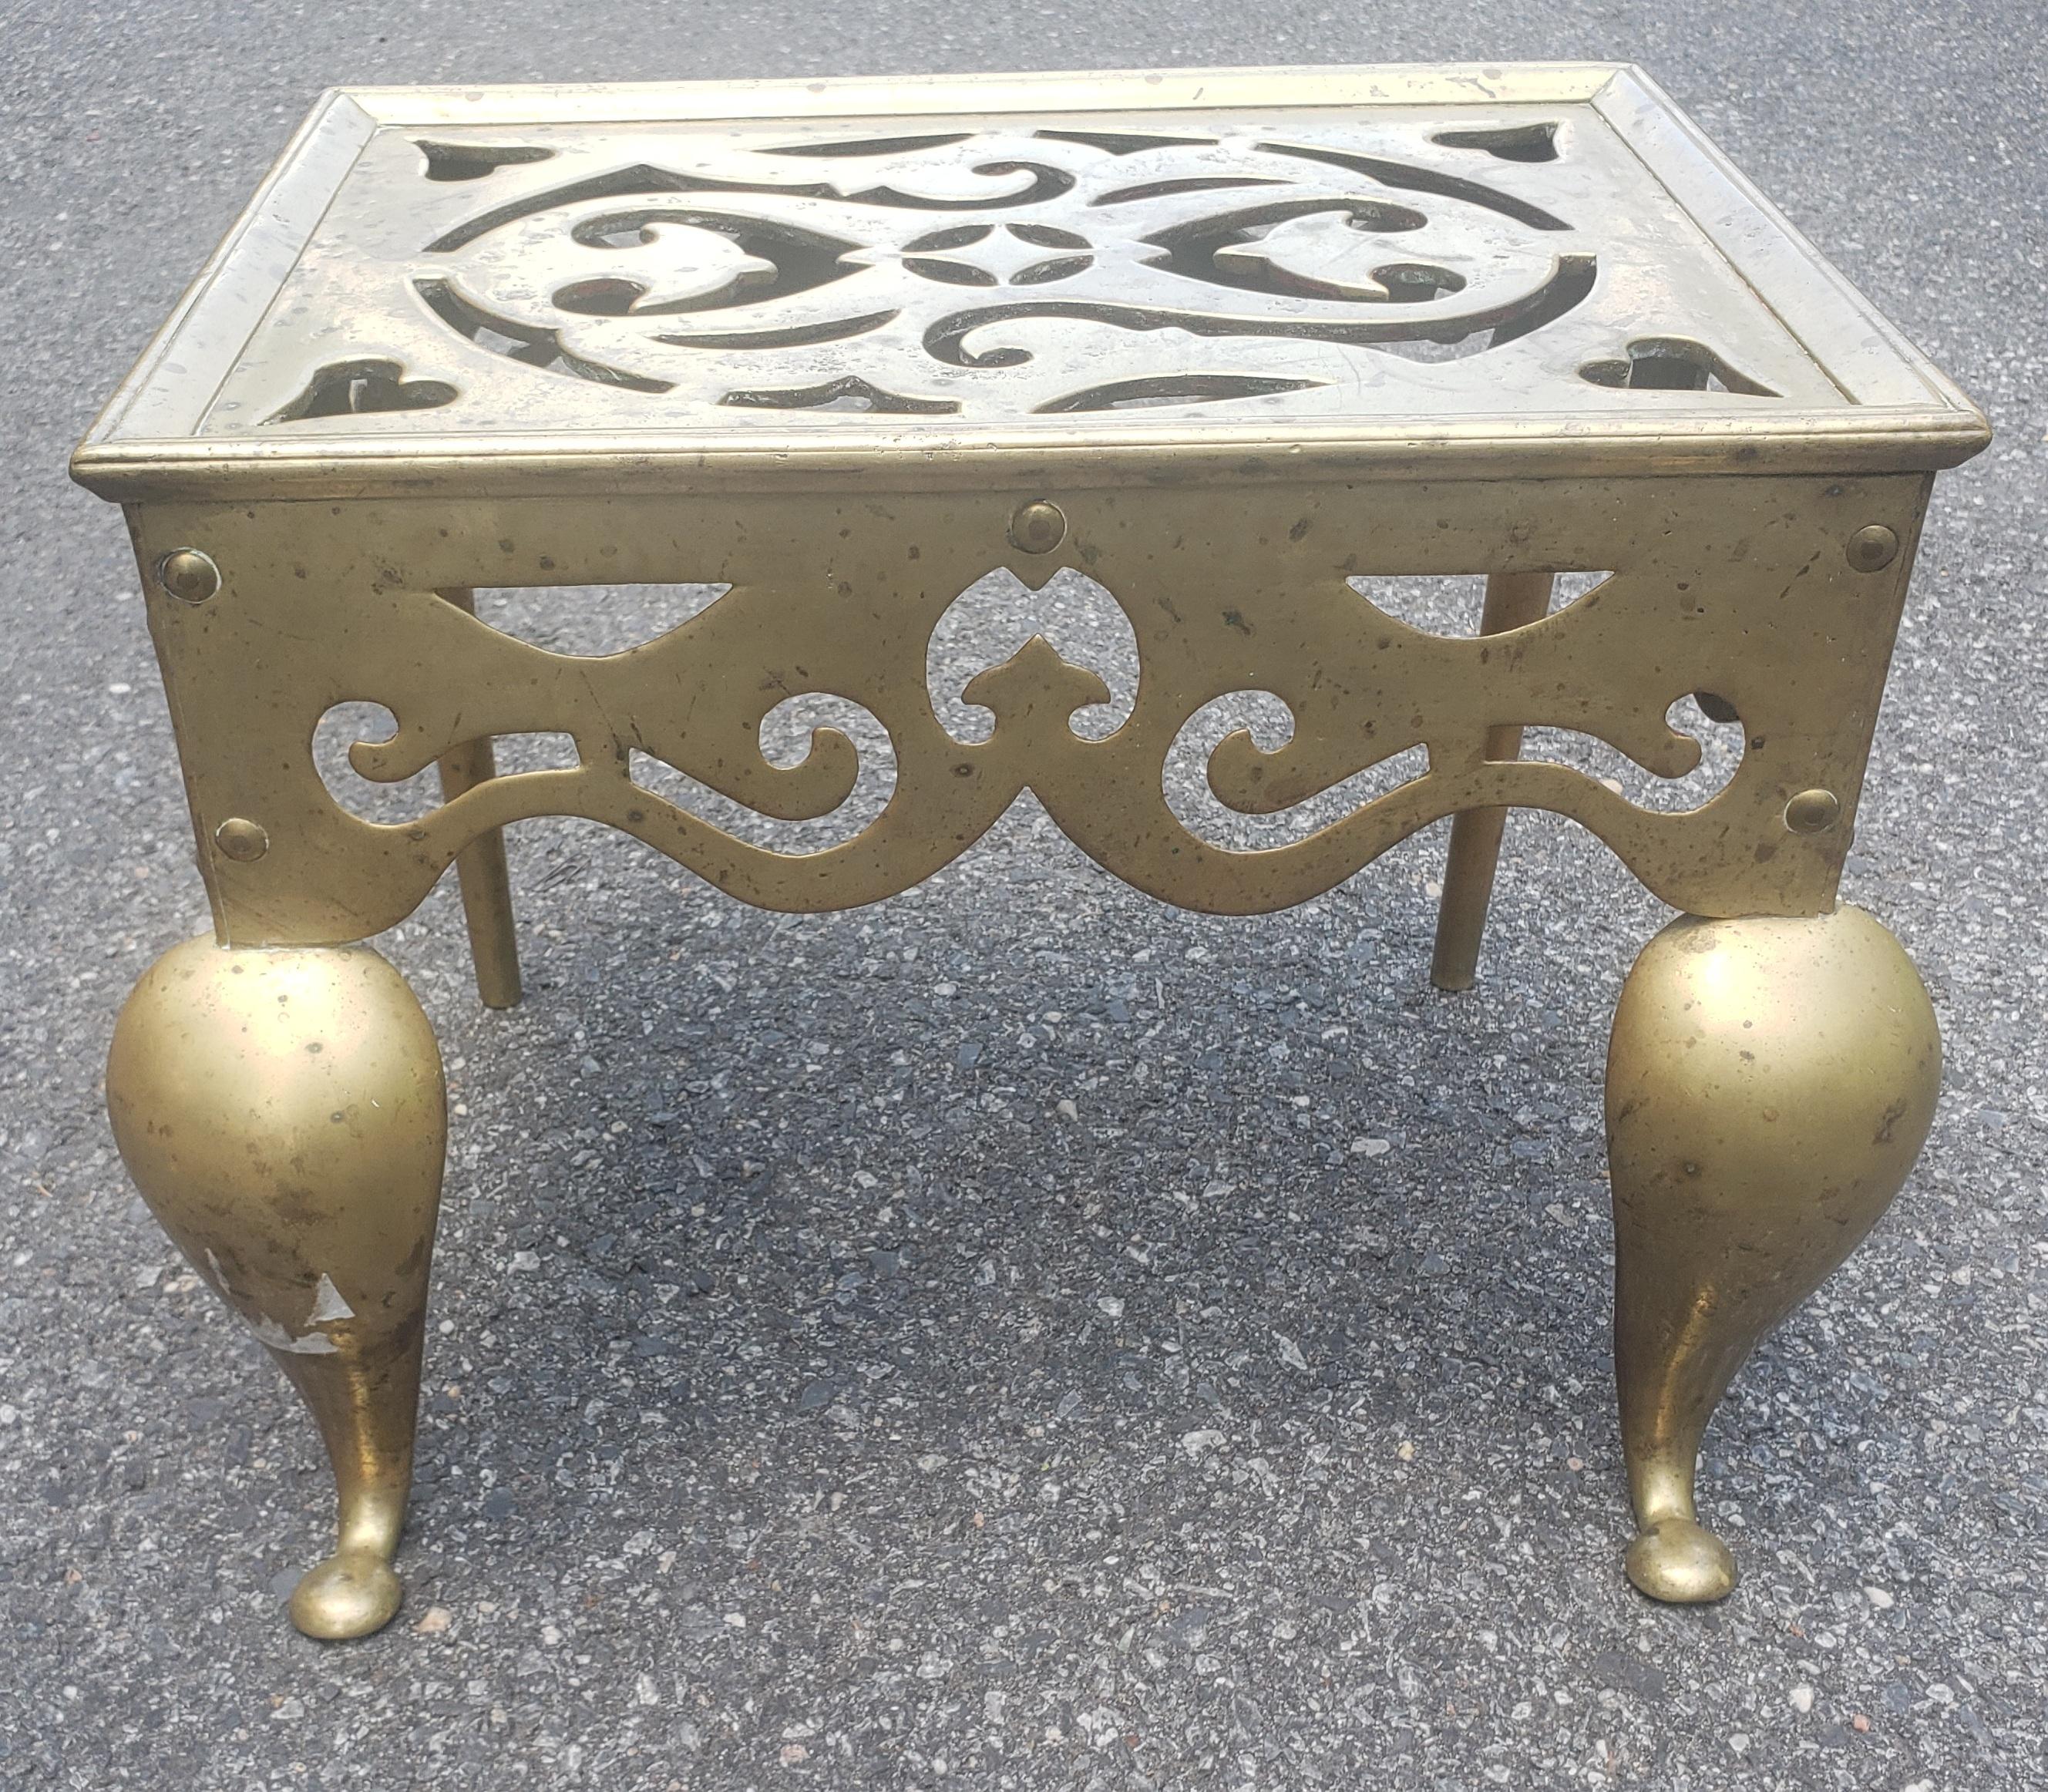 Federal Style cast and polished brass hearth bench or trivet with a pierced floral top, pierced floral border skirt, and terminating on cabriole legs with stylized penny feet, Mid-19th century. Hearth Bench or trivet Typically used in the 19th